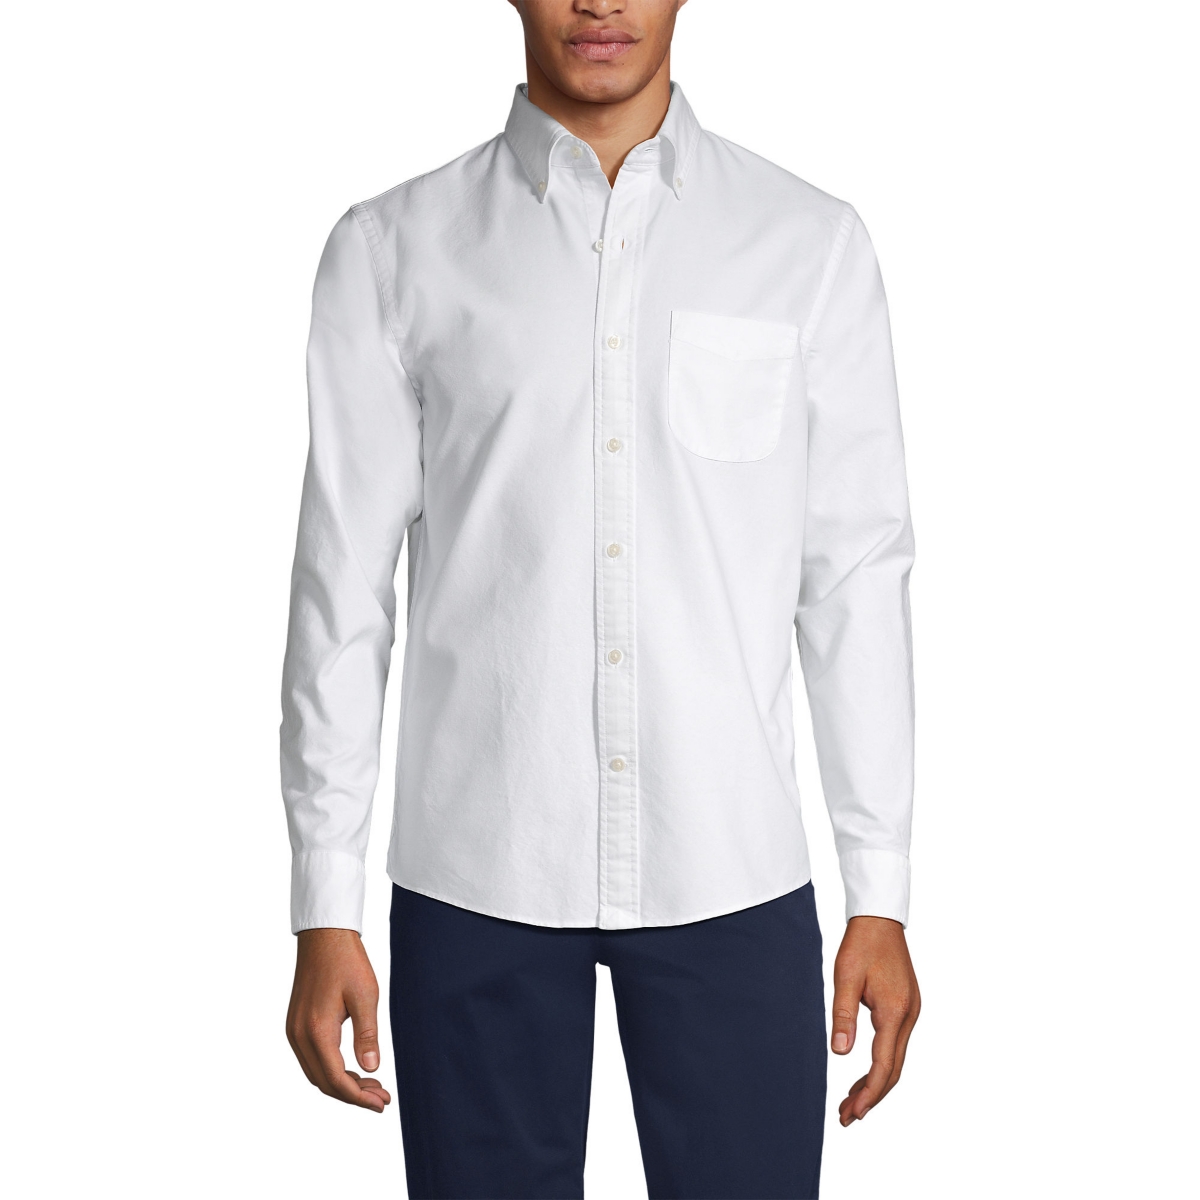 Men's Tailored Fit Long Sleeve Sail Rigger Oxford Shirt - White